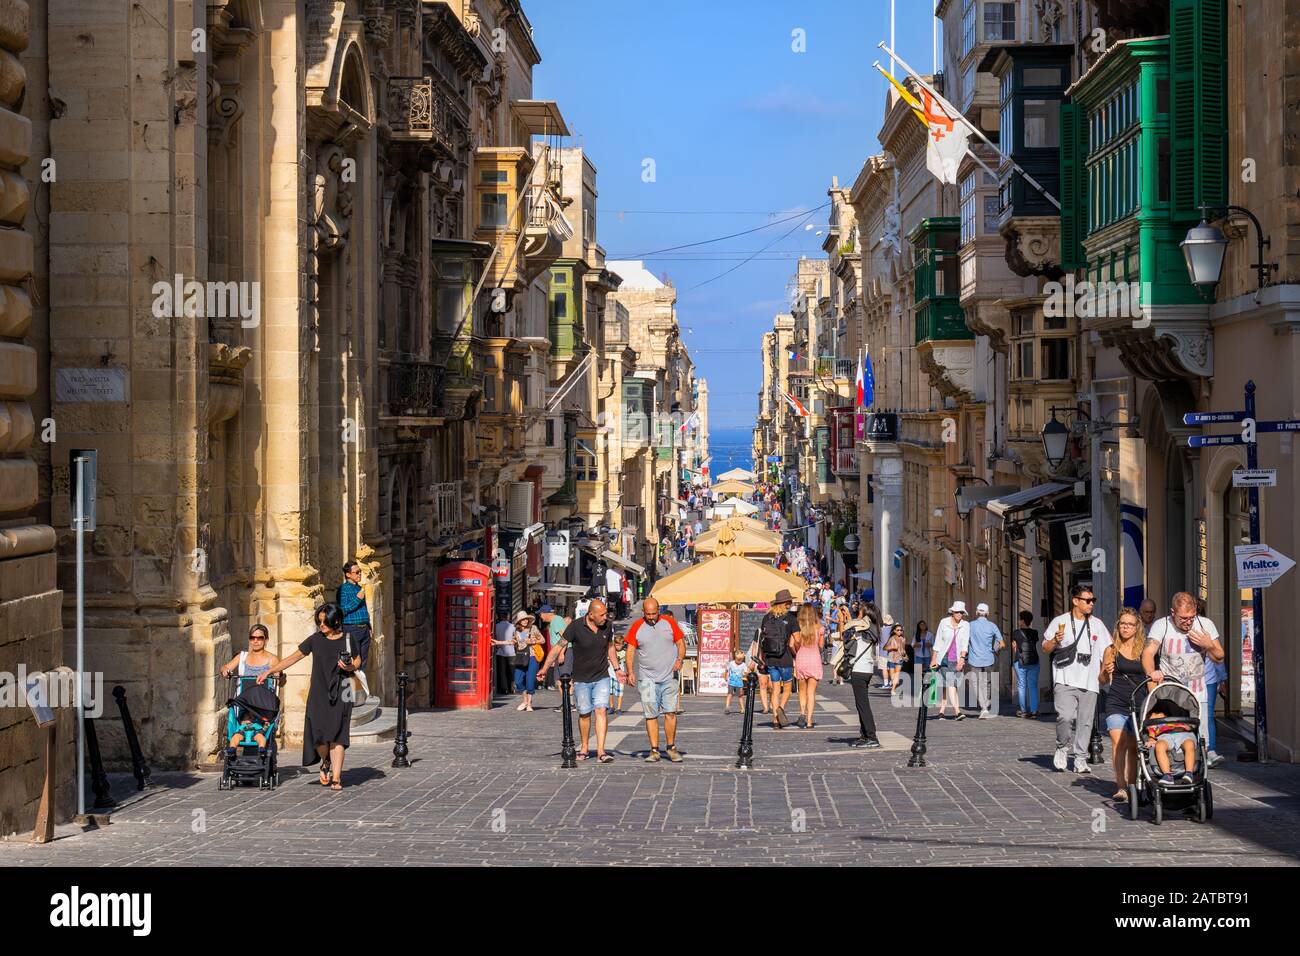 Valletta, Malta - October 13, 2019: Merchants Street in capital city, lively shopping pedestrian boulevard full of tourists and locals, stalls, stores Stock Photo